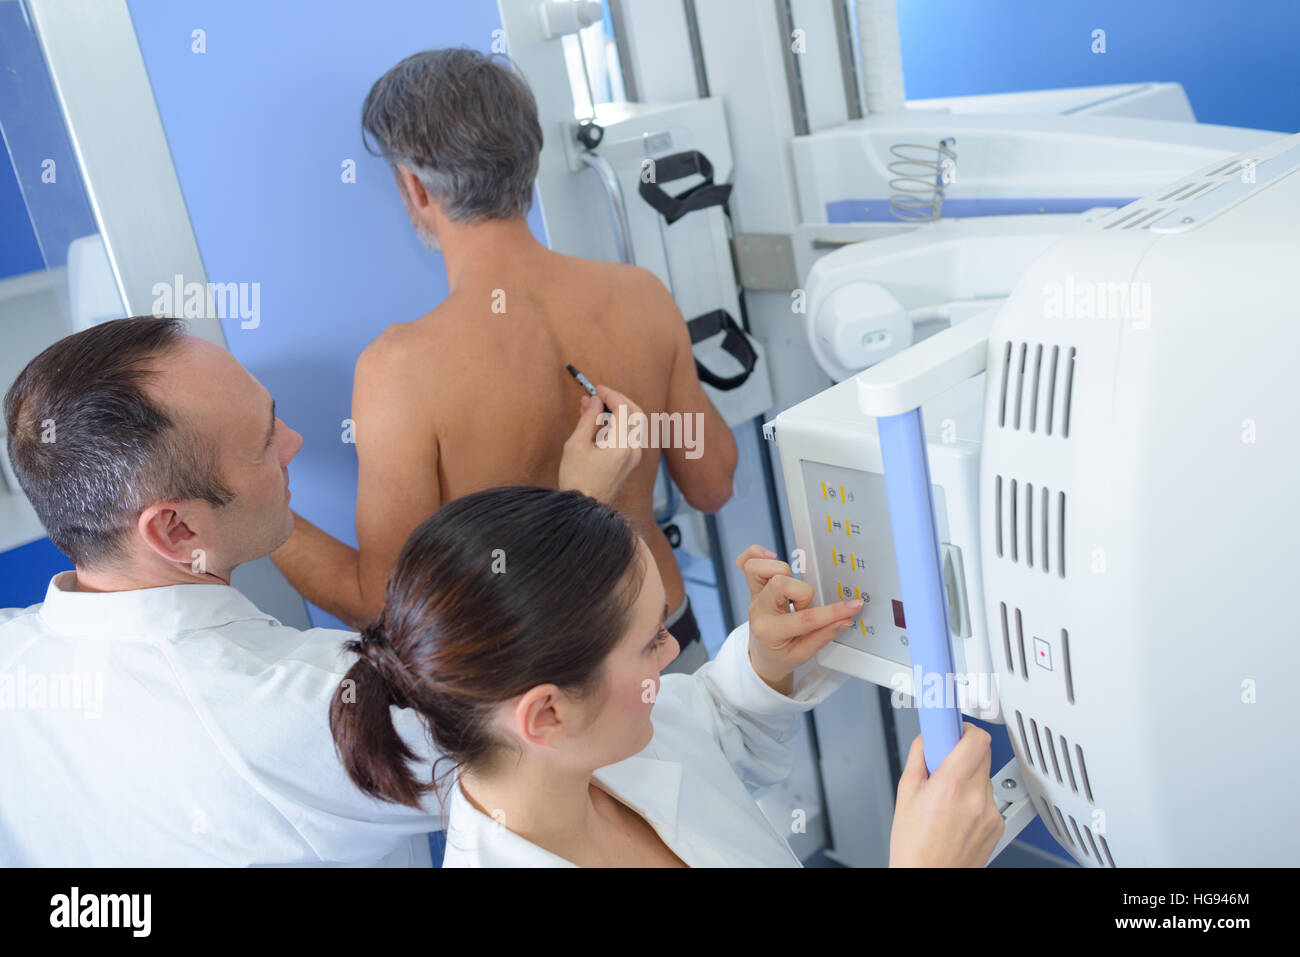 Doctor marking patient's back for medical procedure Stock Photo